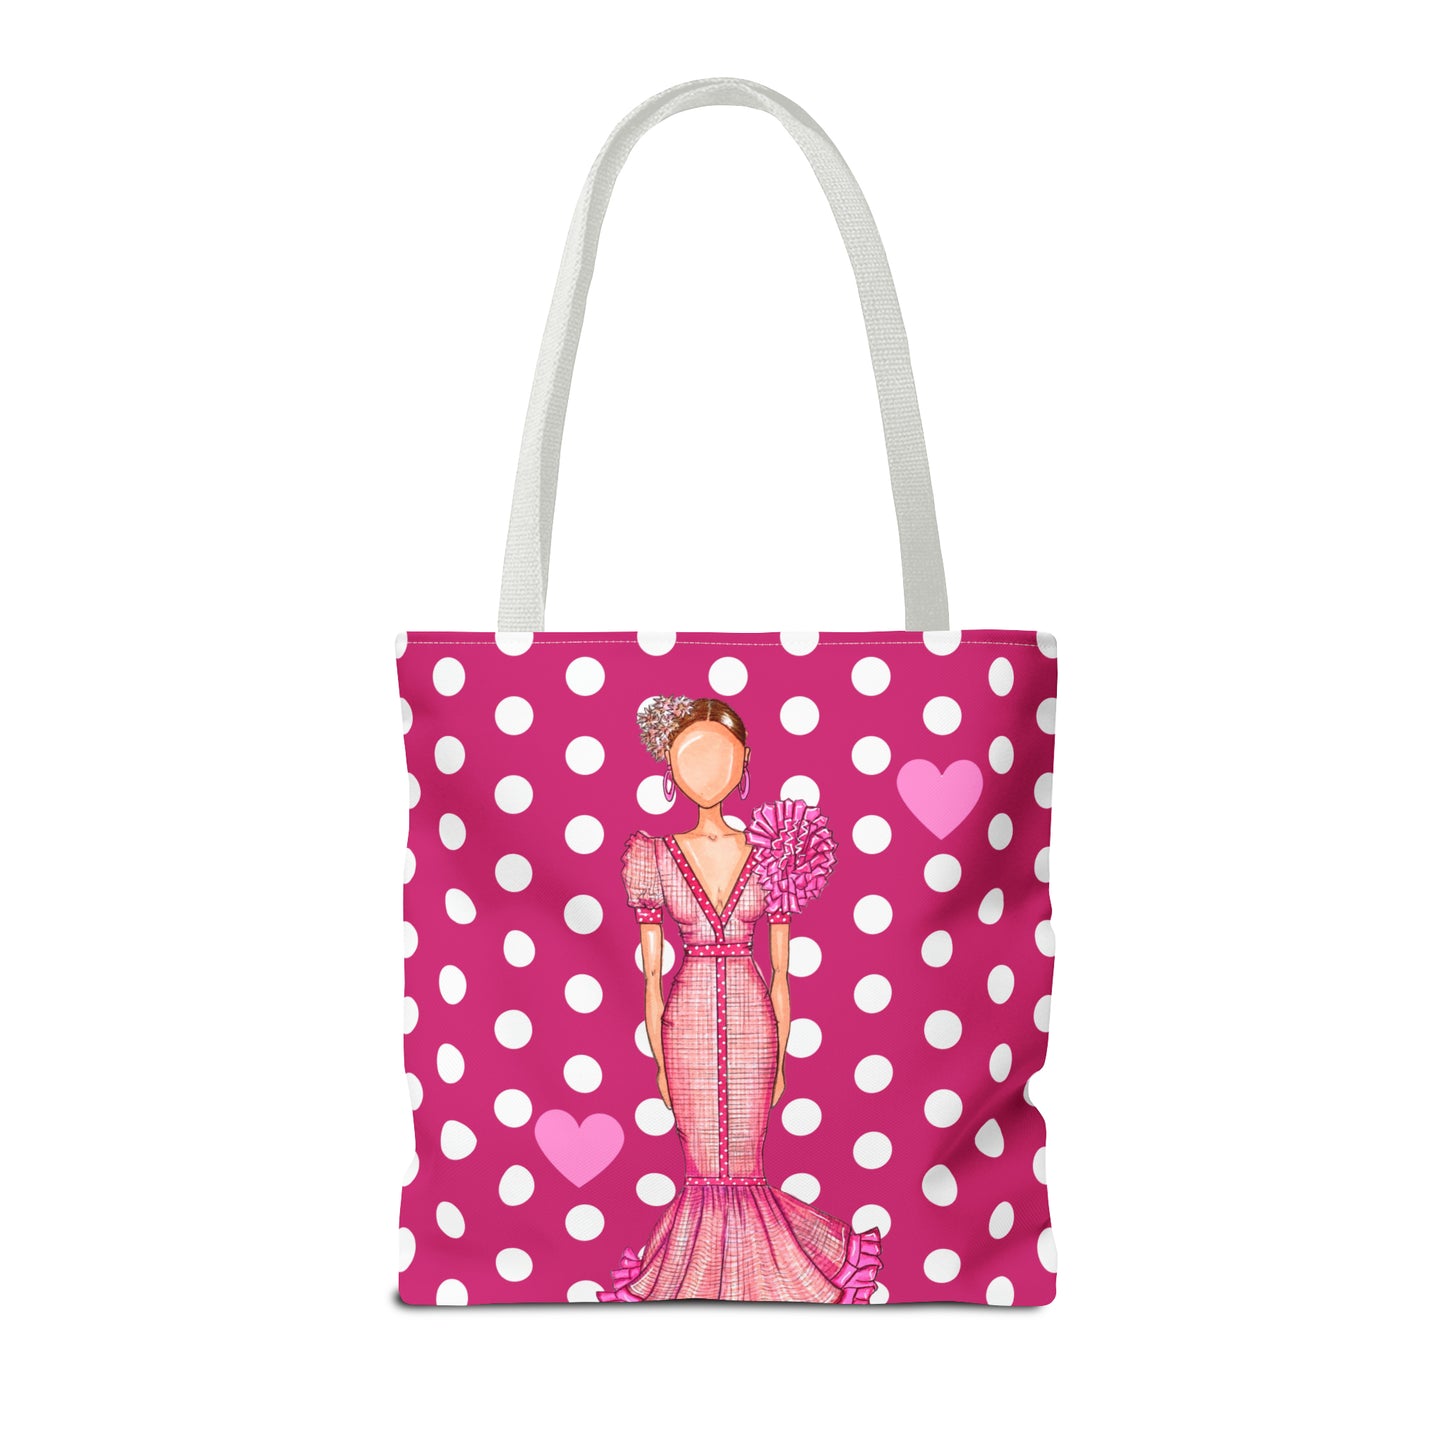 a pink and white polka dot tote bag with a woman in a pink dress